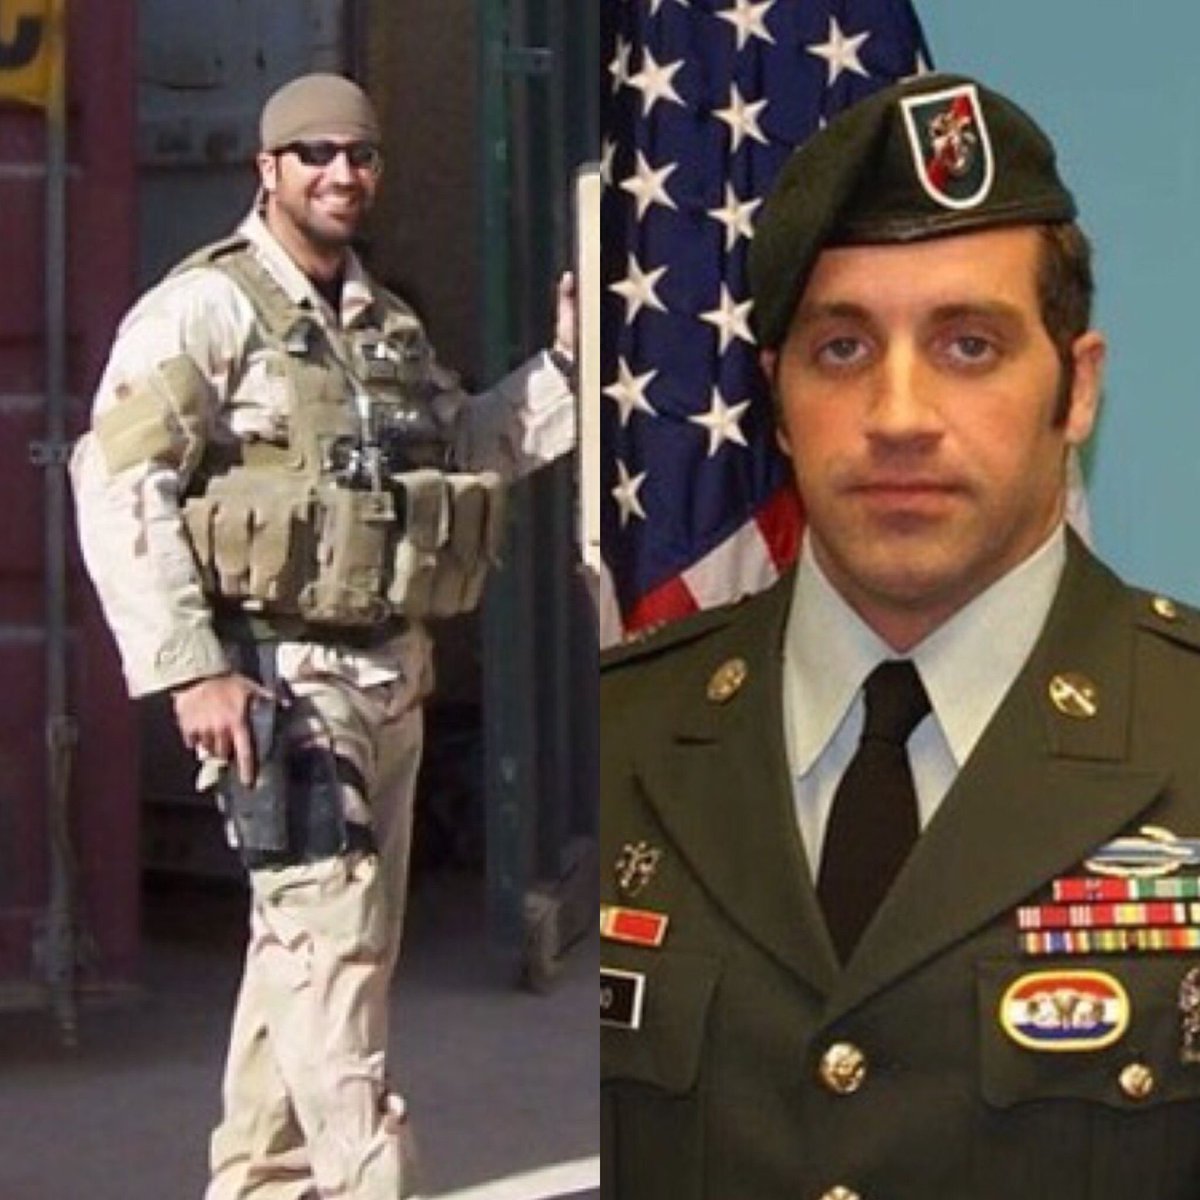 Any nation that does not honor its heroes will not long endure

#SSGMATTHEWPUCINO #greenberet #Blackbeard #5THSFG #20thSFG #ODA2223 #Warrior #Hero #neverforgotten